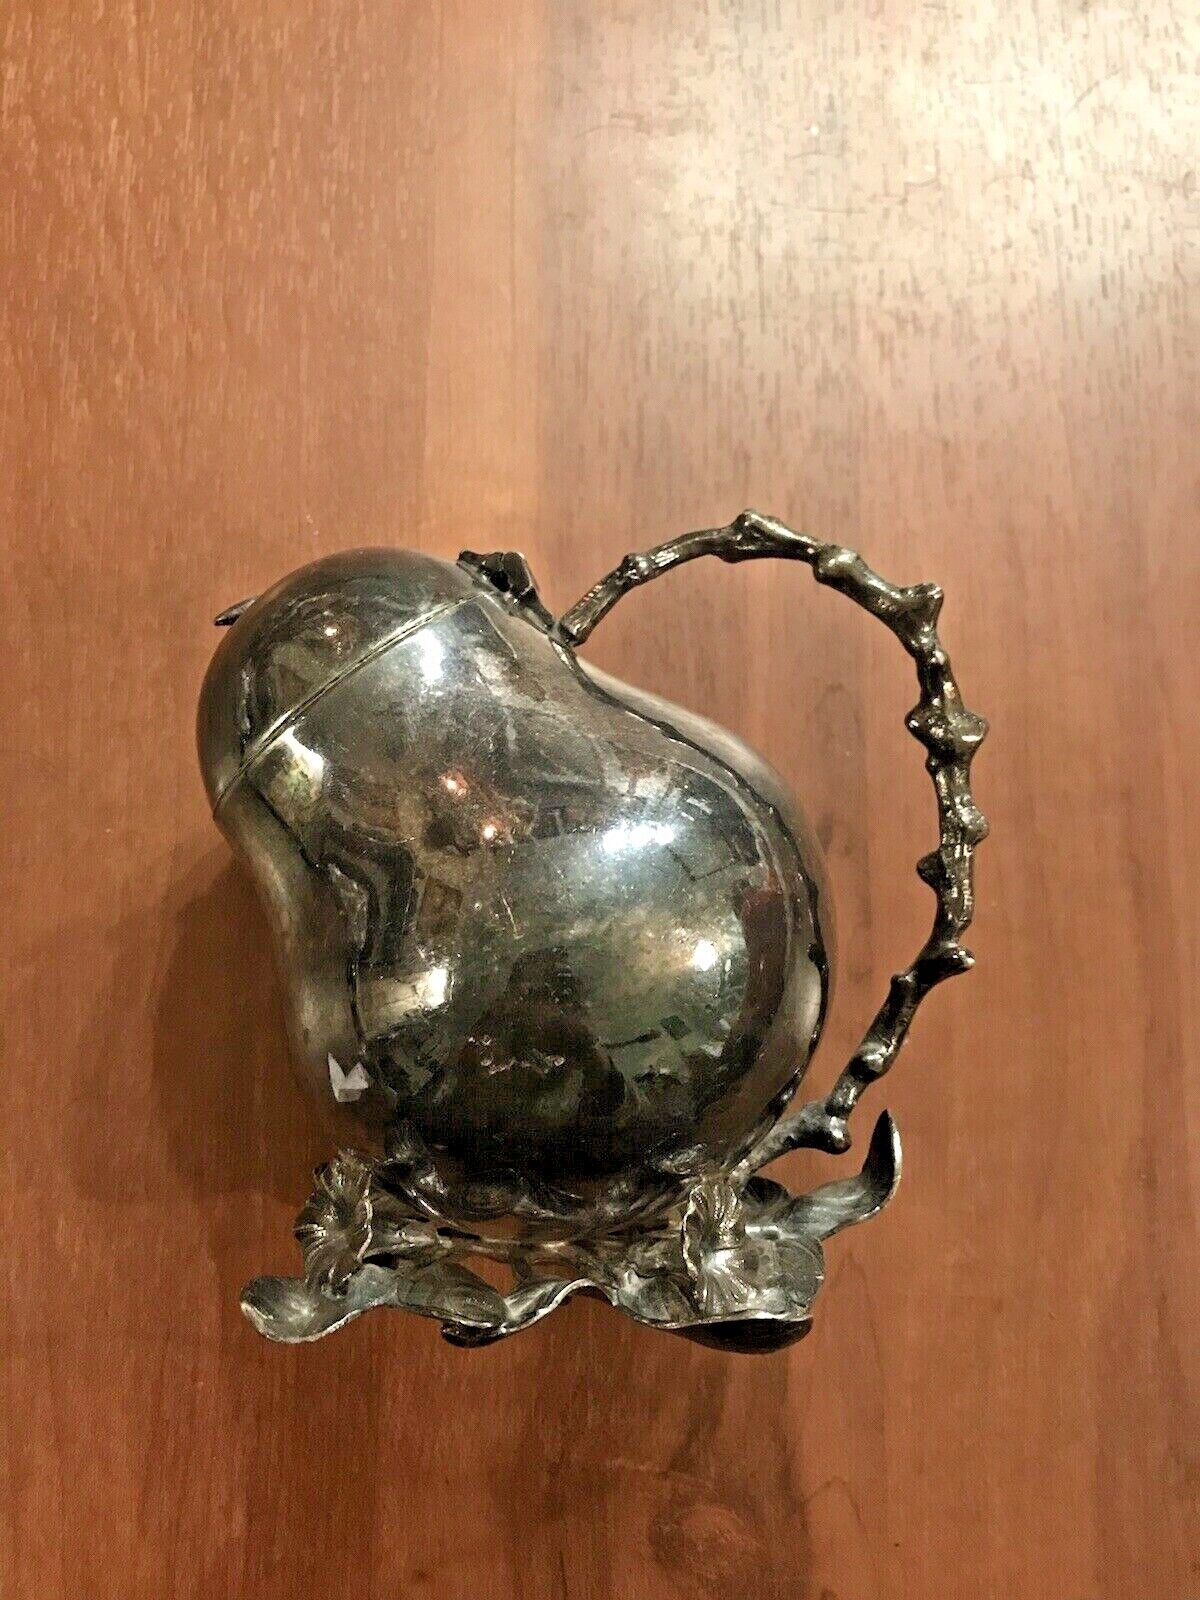 Vintage Philip Ashberry & Sons Silver Plate Pear Sugar Scuttle - No Scoop